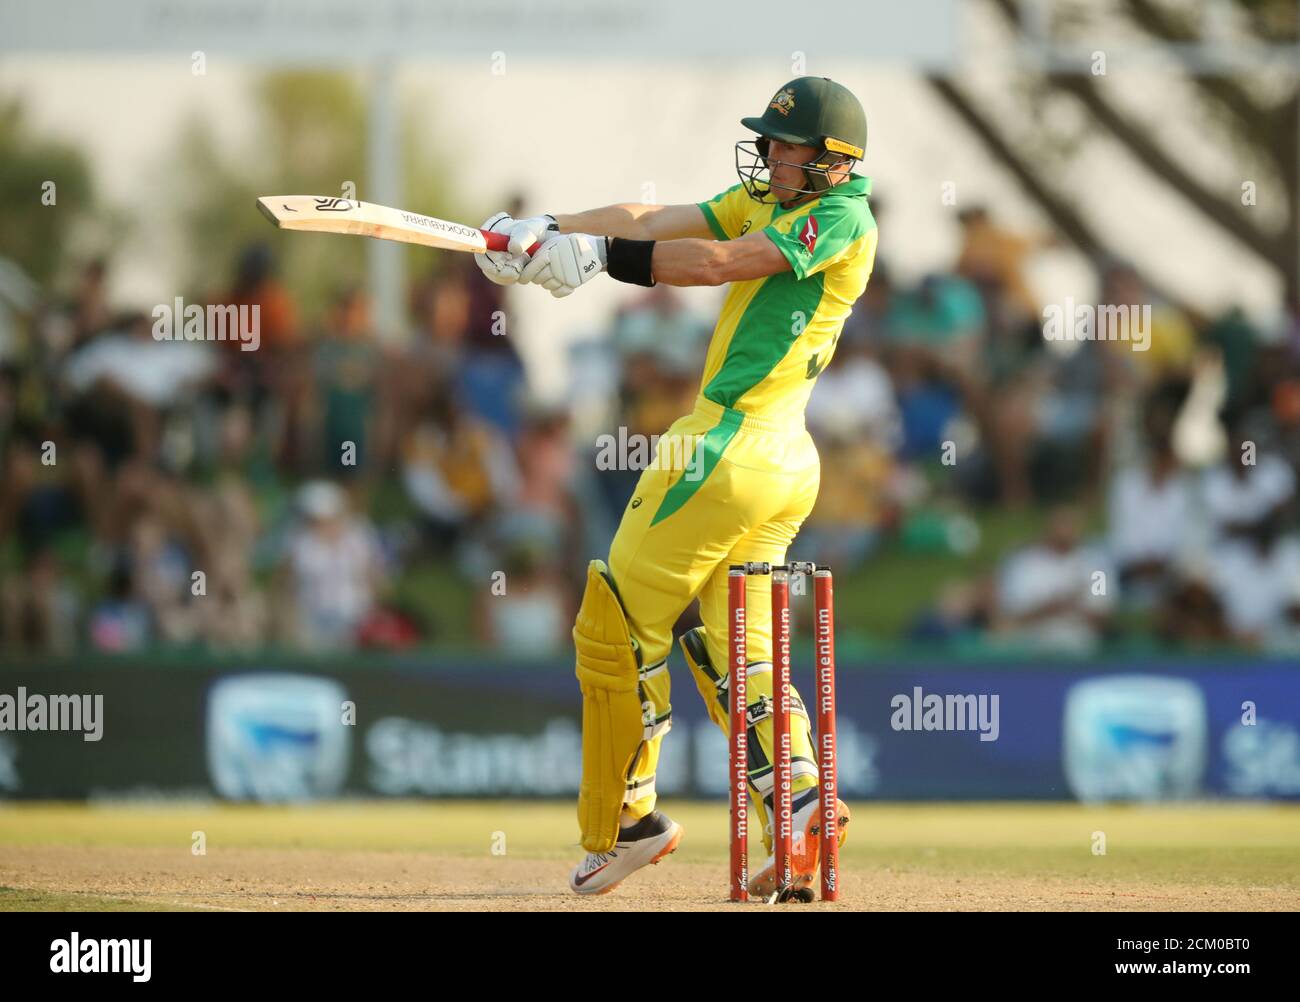 Cricket - South Africa v Australia - First ODI - Boland Park, Paarl, South Africa - February 29, 2020   Australia's Marnus Labuschagne in action   REUTERS/Mike Hutchings Stock Photo